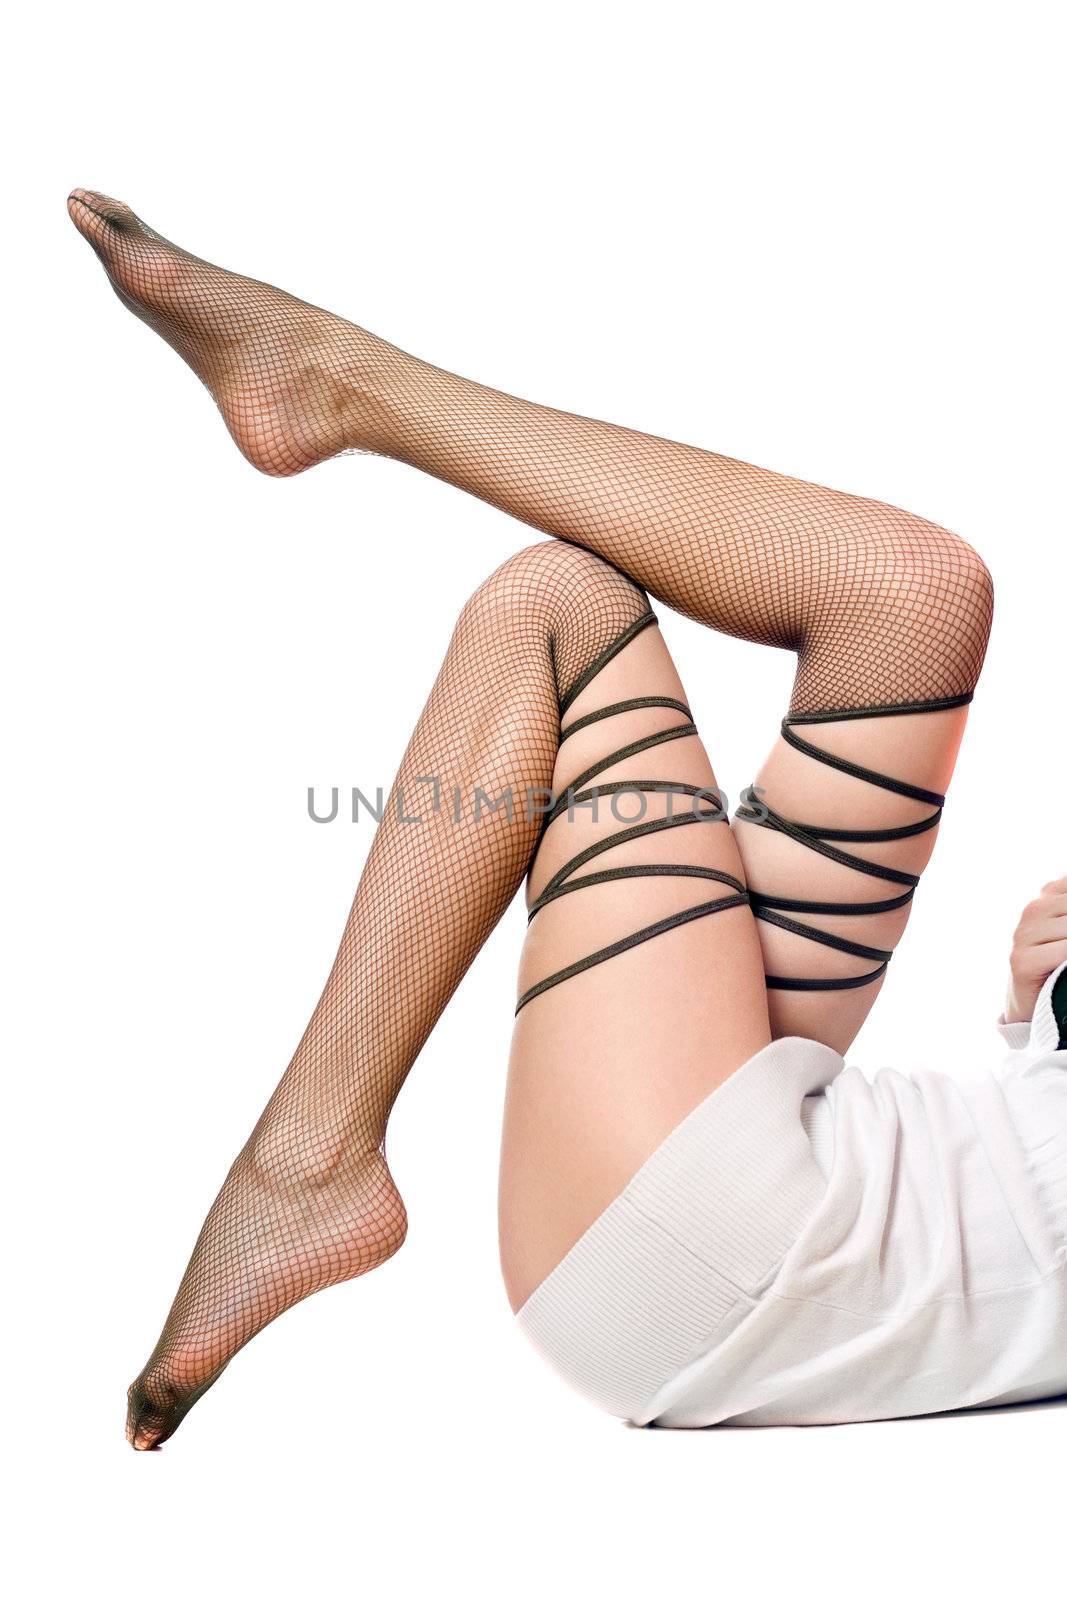 Sexy shapely women's legs in pantyhose. Isolated on white by acidgrey